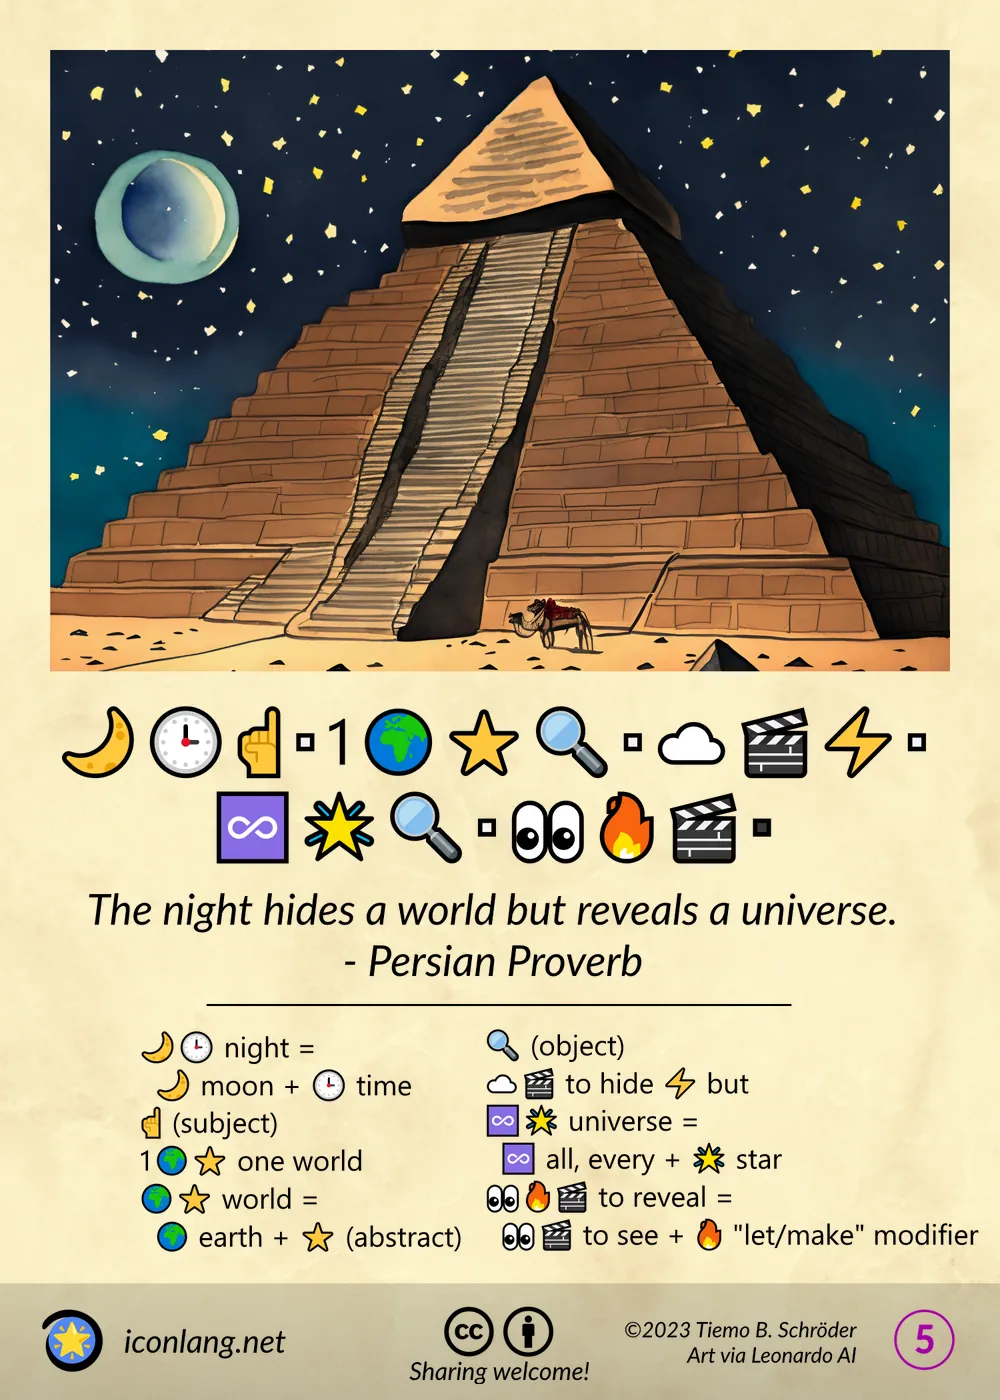 Card: The night hides a world but reveals a universe. - Persian Proverb